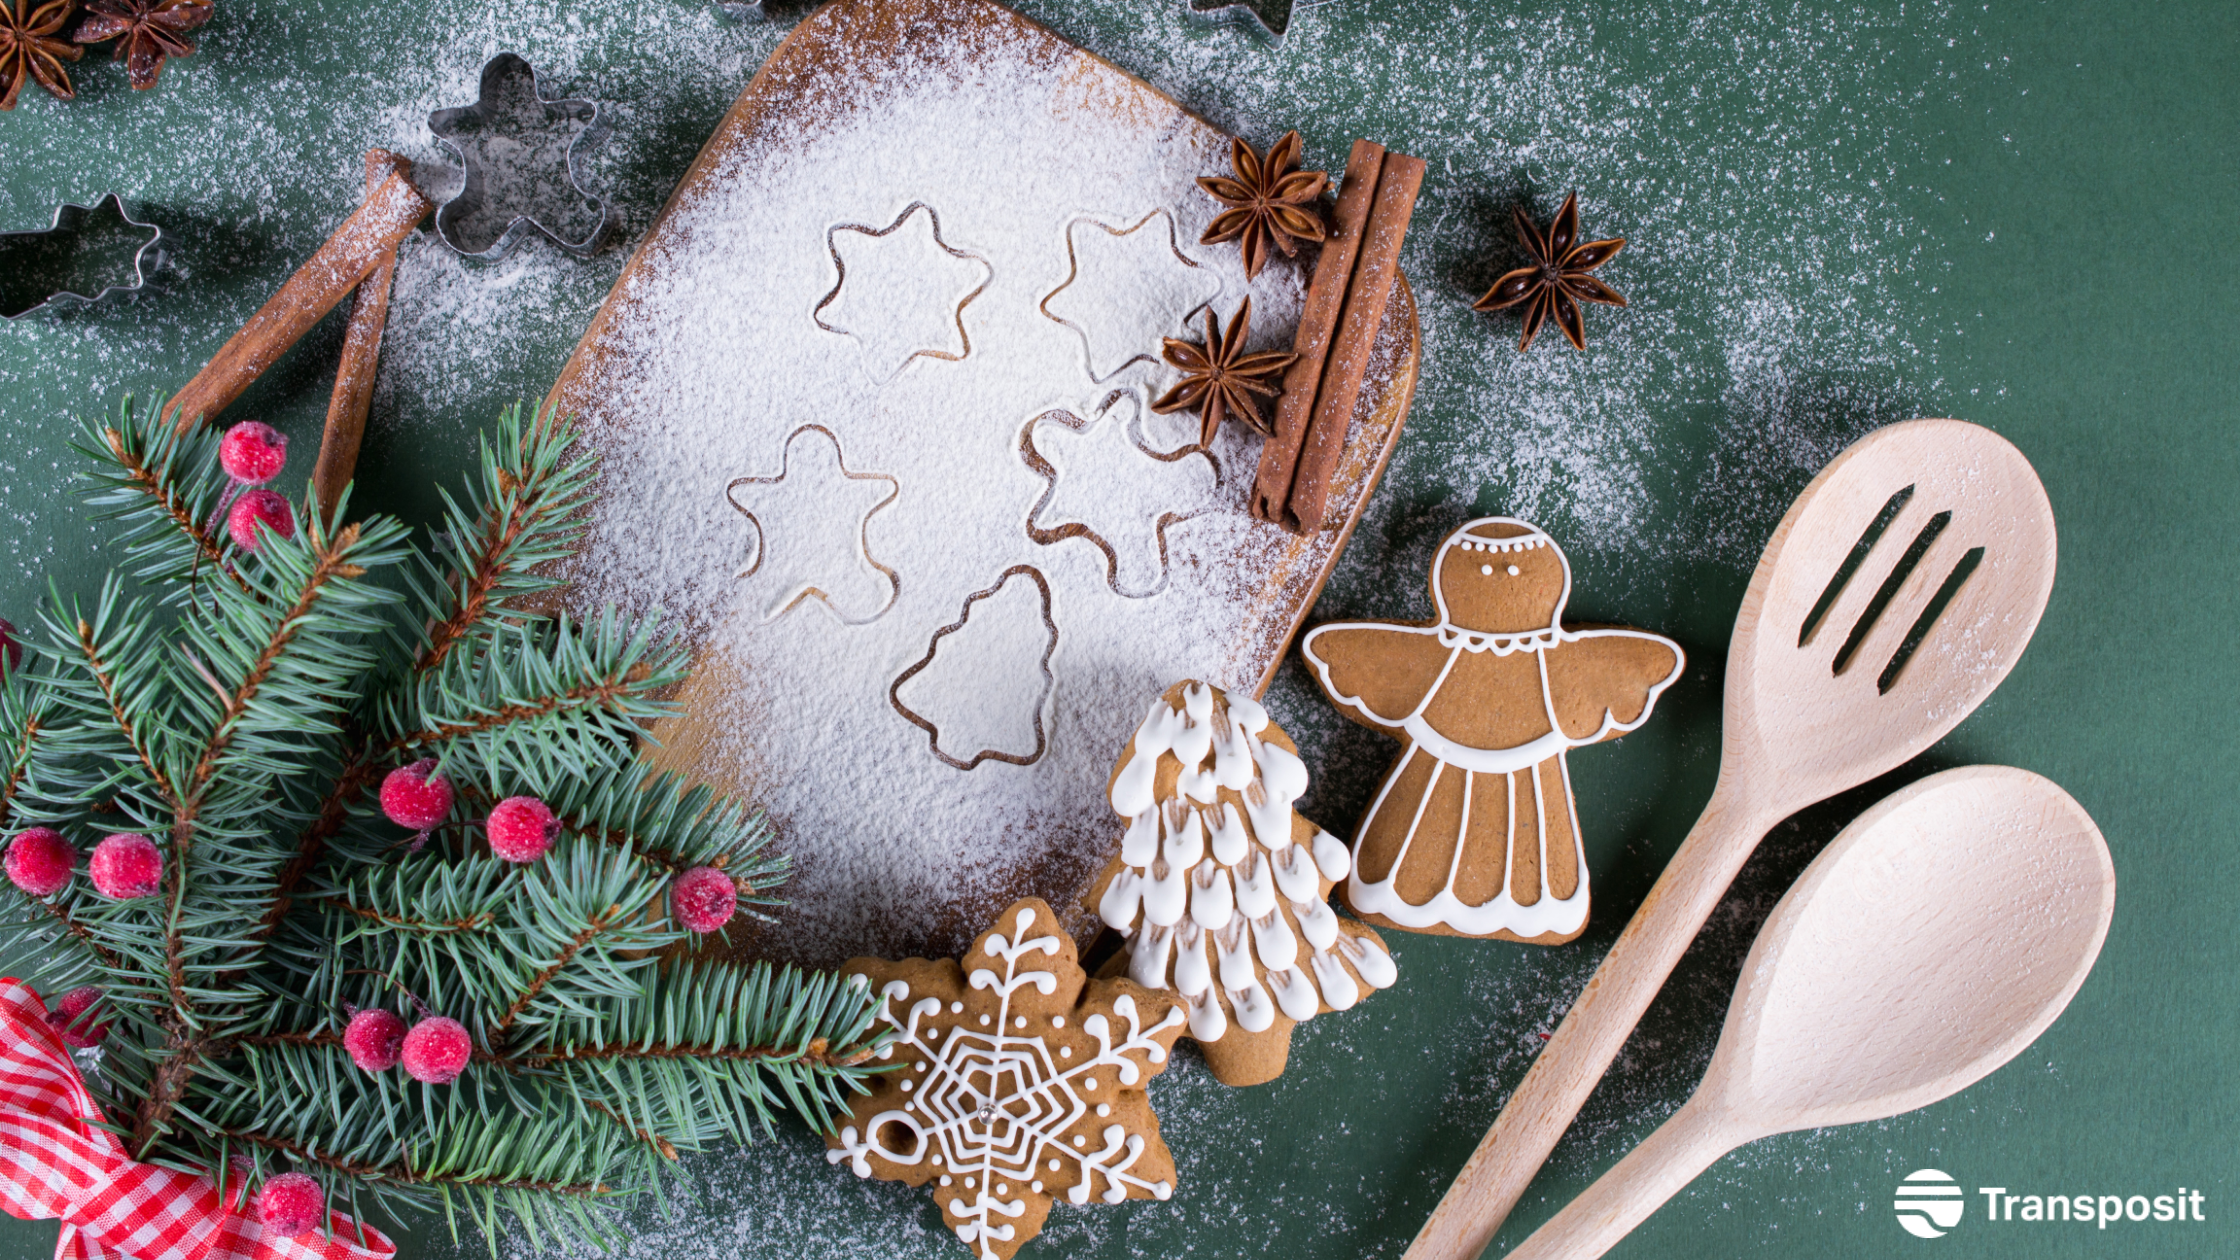 Baking tools, Holly, and Gingerbread cookies dusted in flour